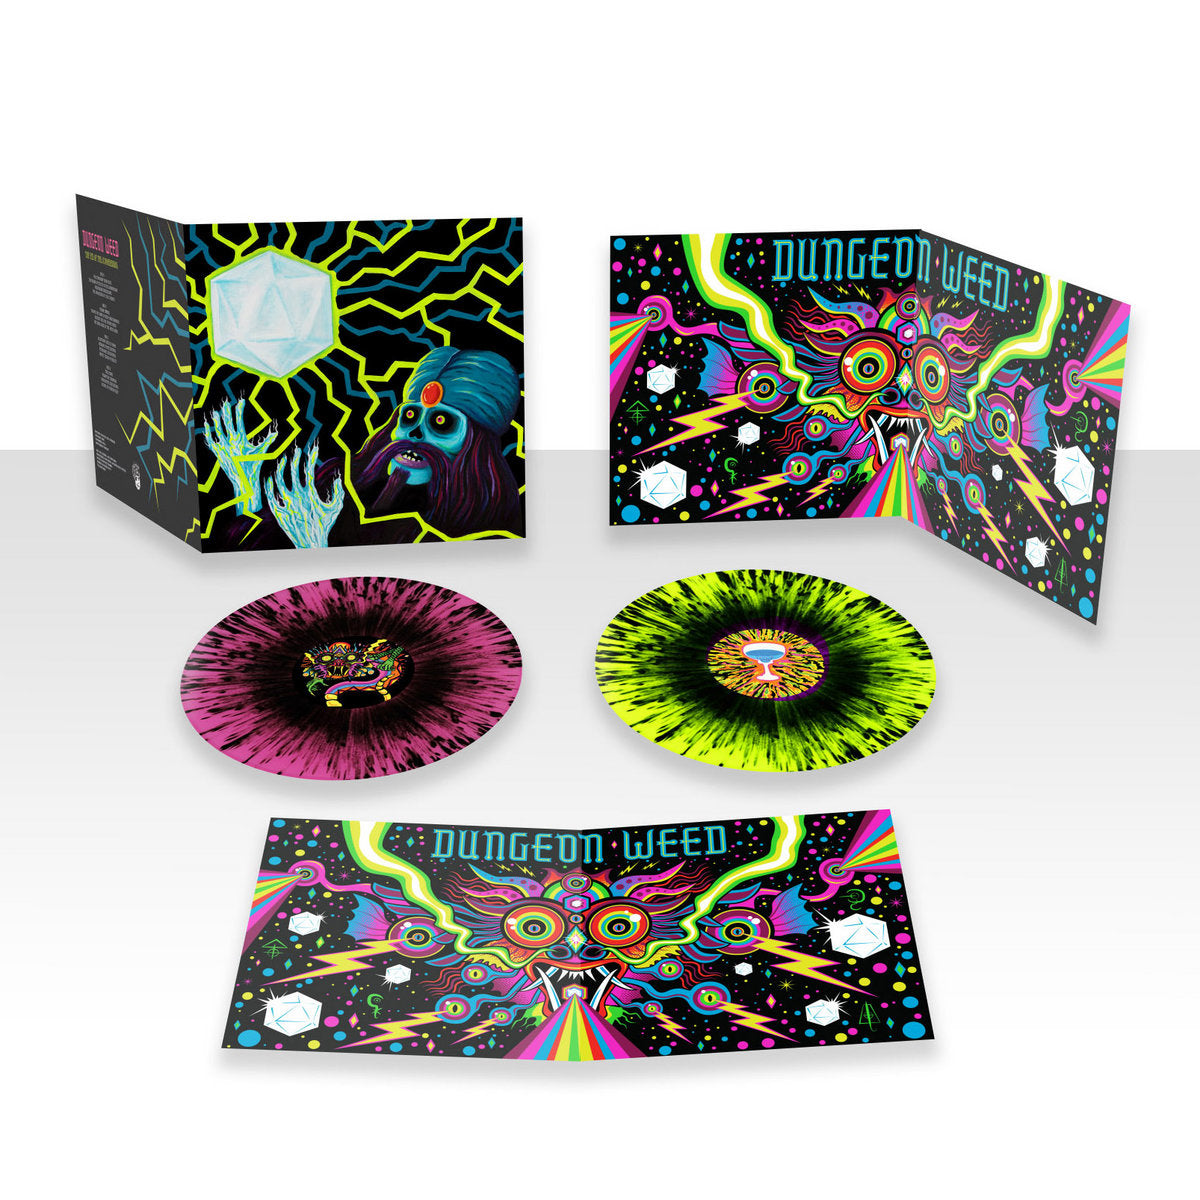 Dungeon Weed - "The Eye of the Icosahedron" Double LP Splatter Vinyl